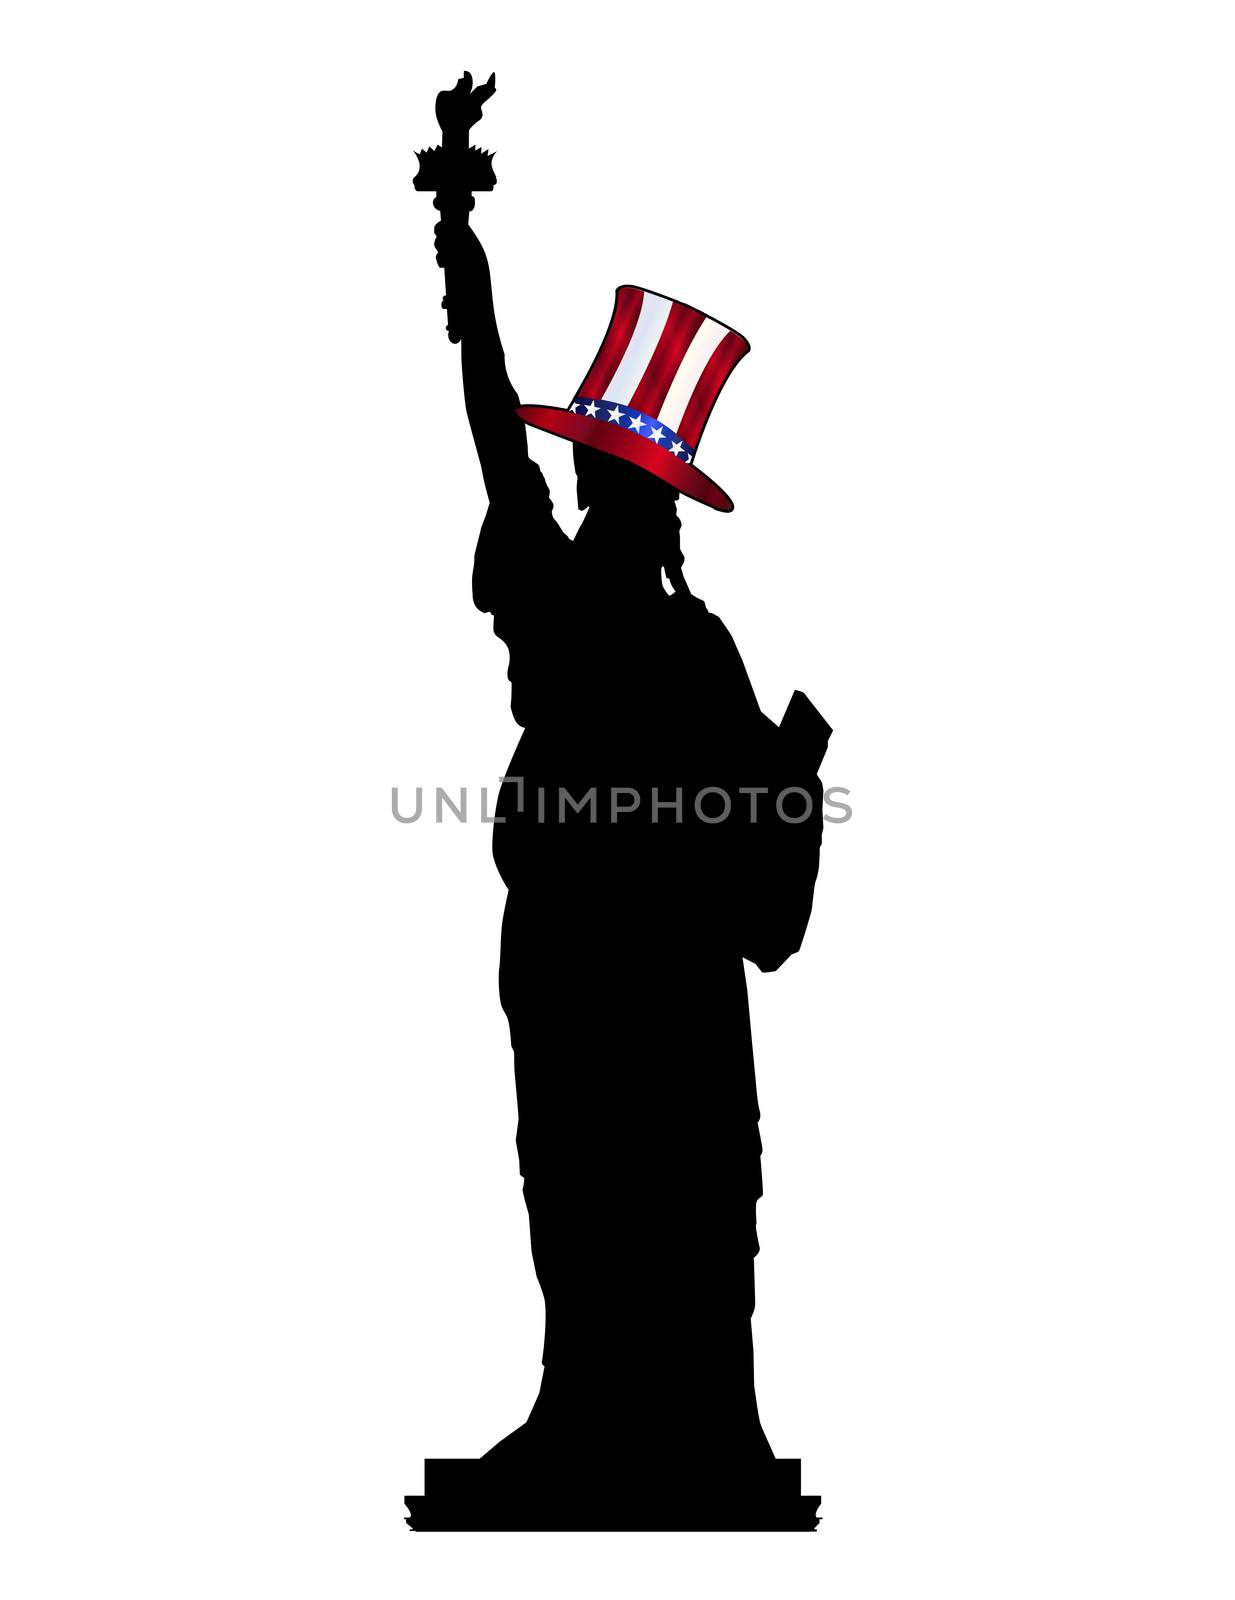 A silhouette of the Statue of Liberty wearing Uncle Sam's hat isolated over a white background